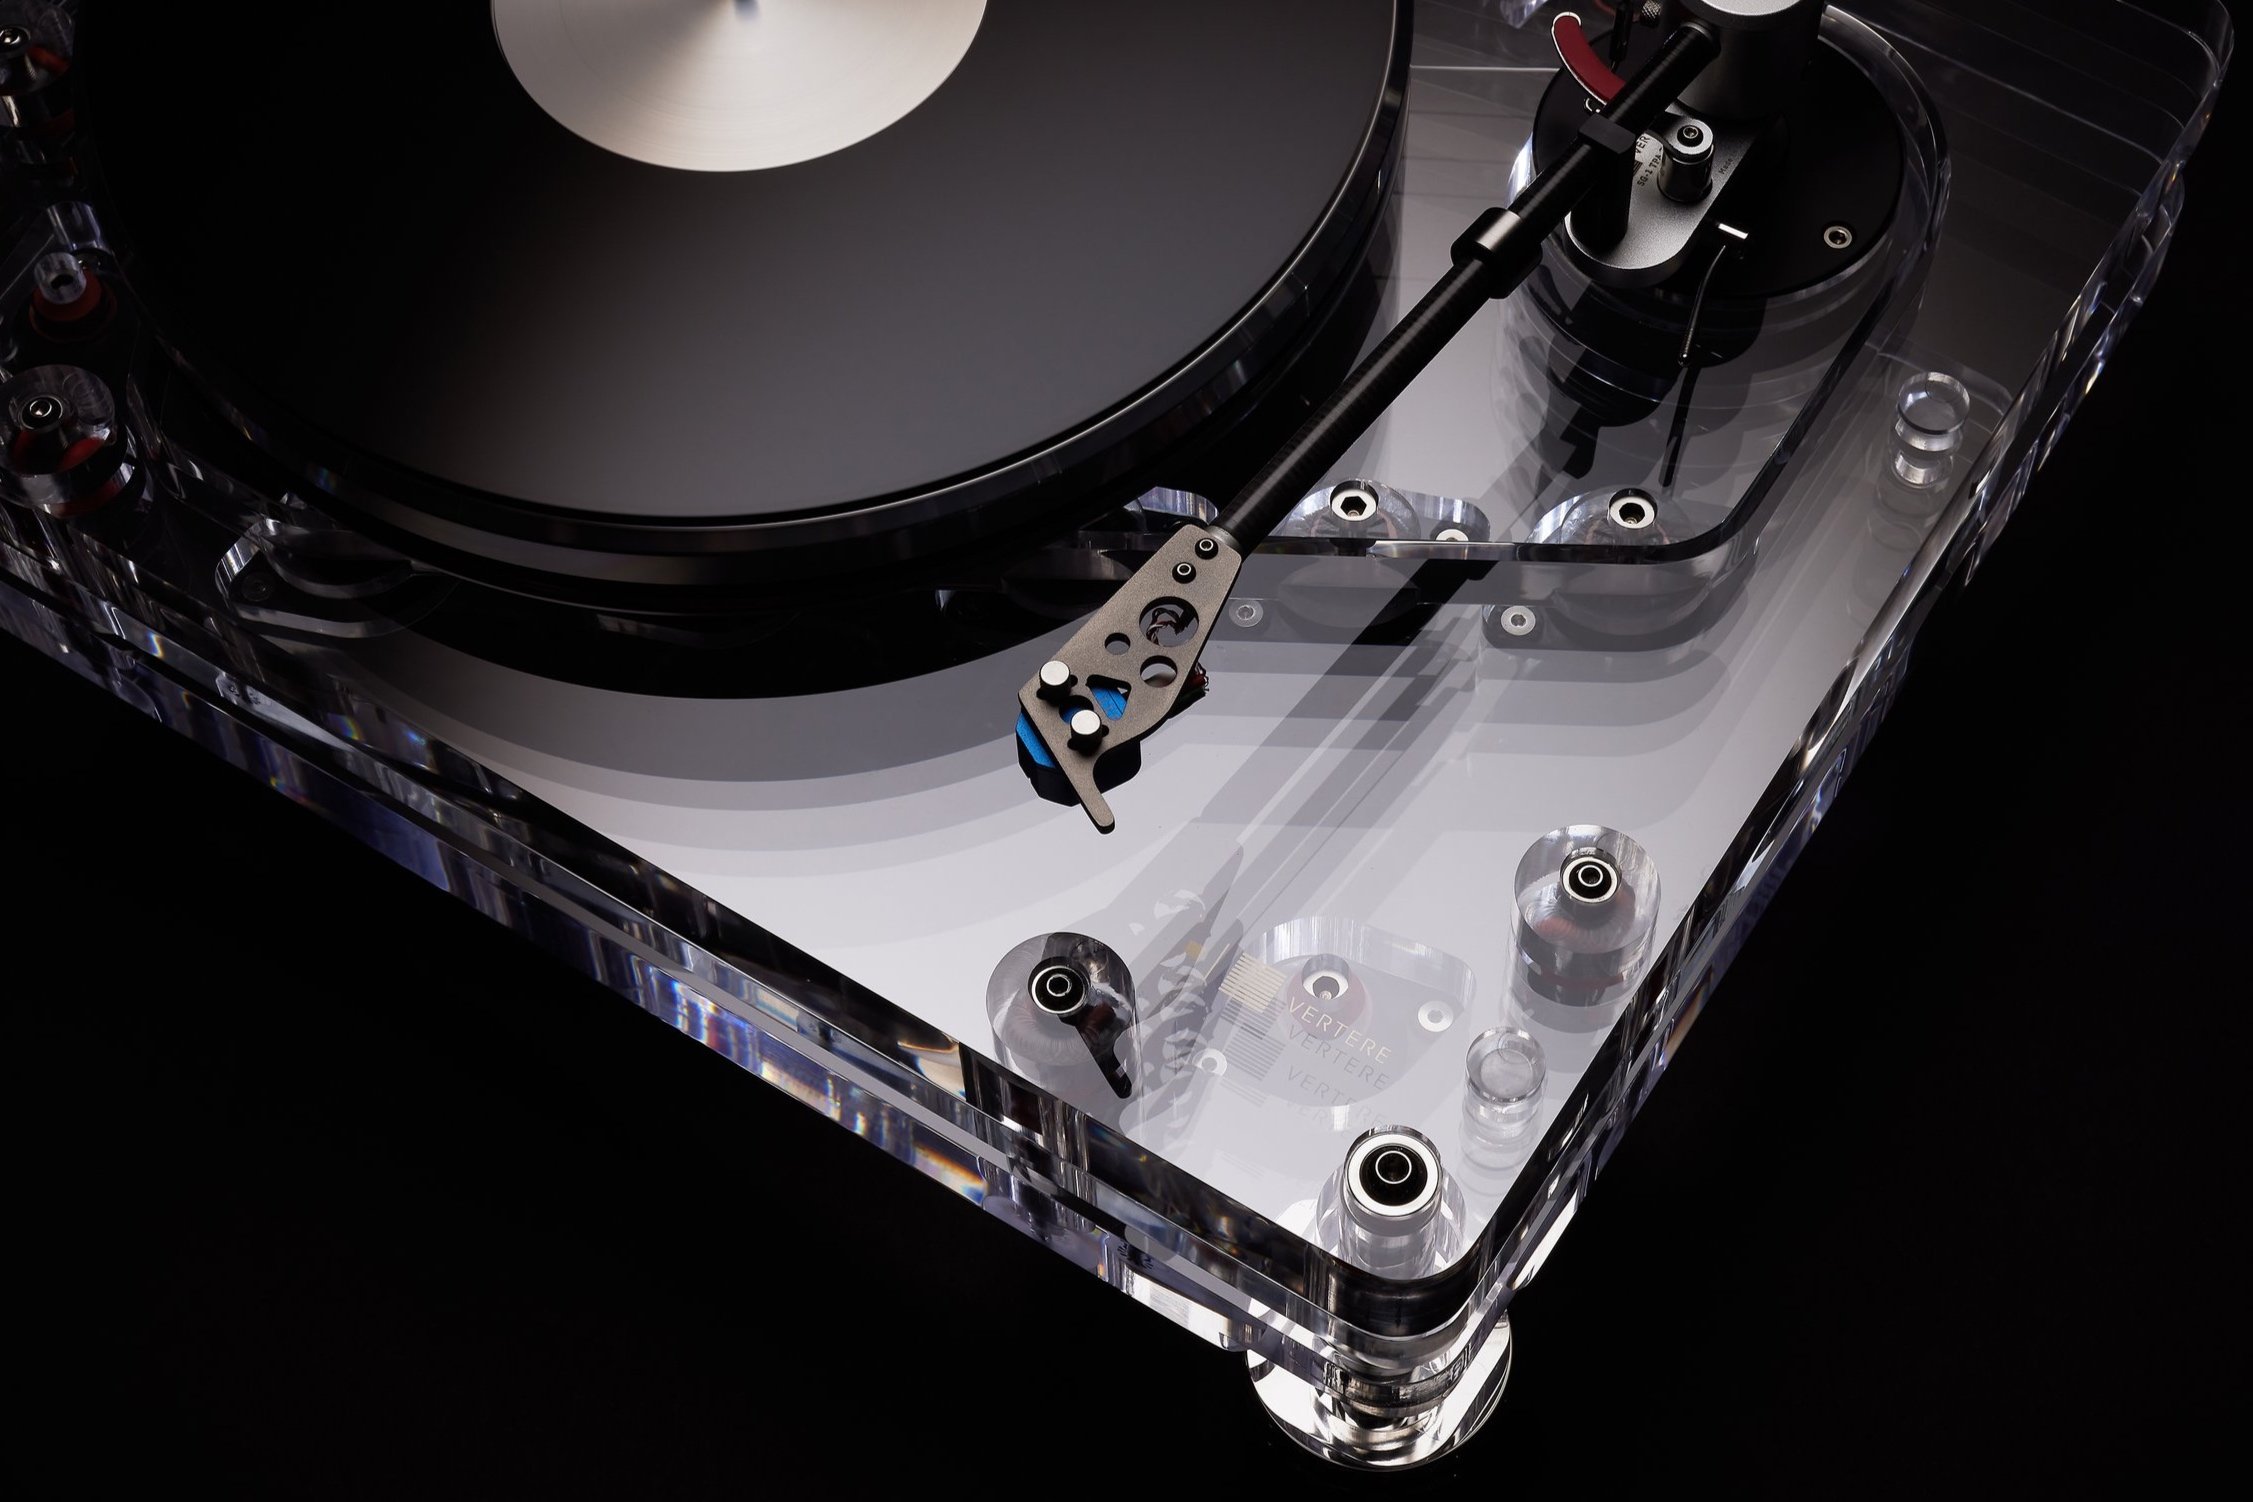 How To Use A Vinyl Turntable